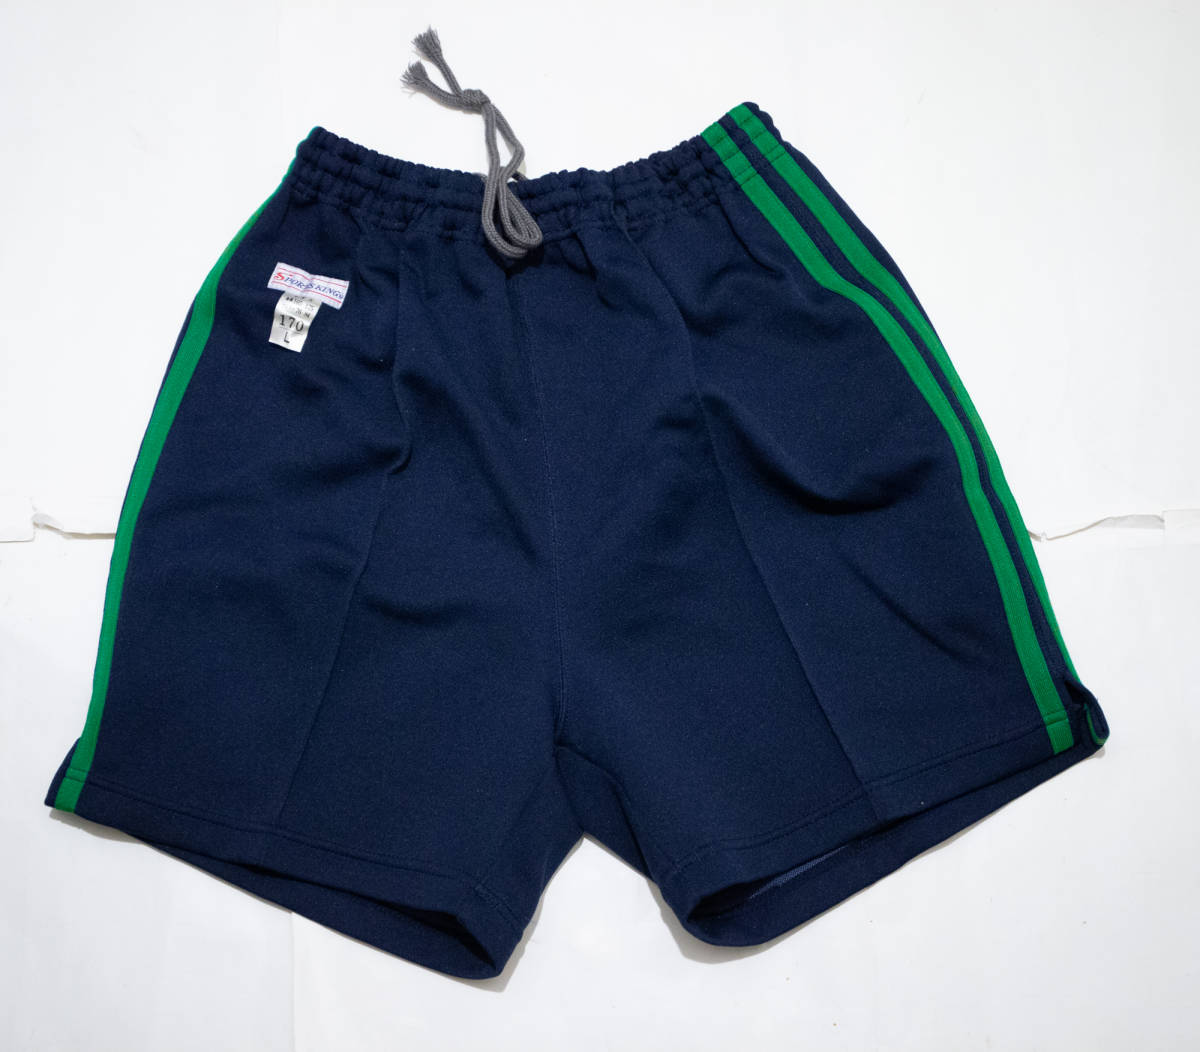  gym uniform *SPORTS KING jersey short bread navy blue × green 2 ps line L unused goods prompt decision!